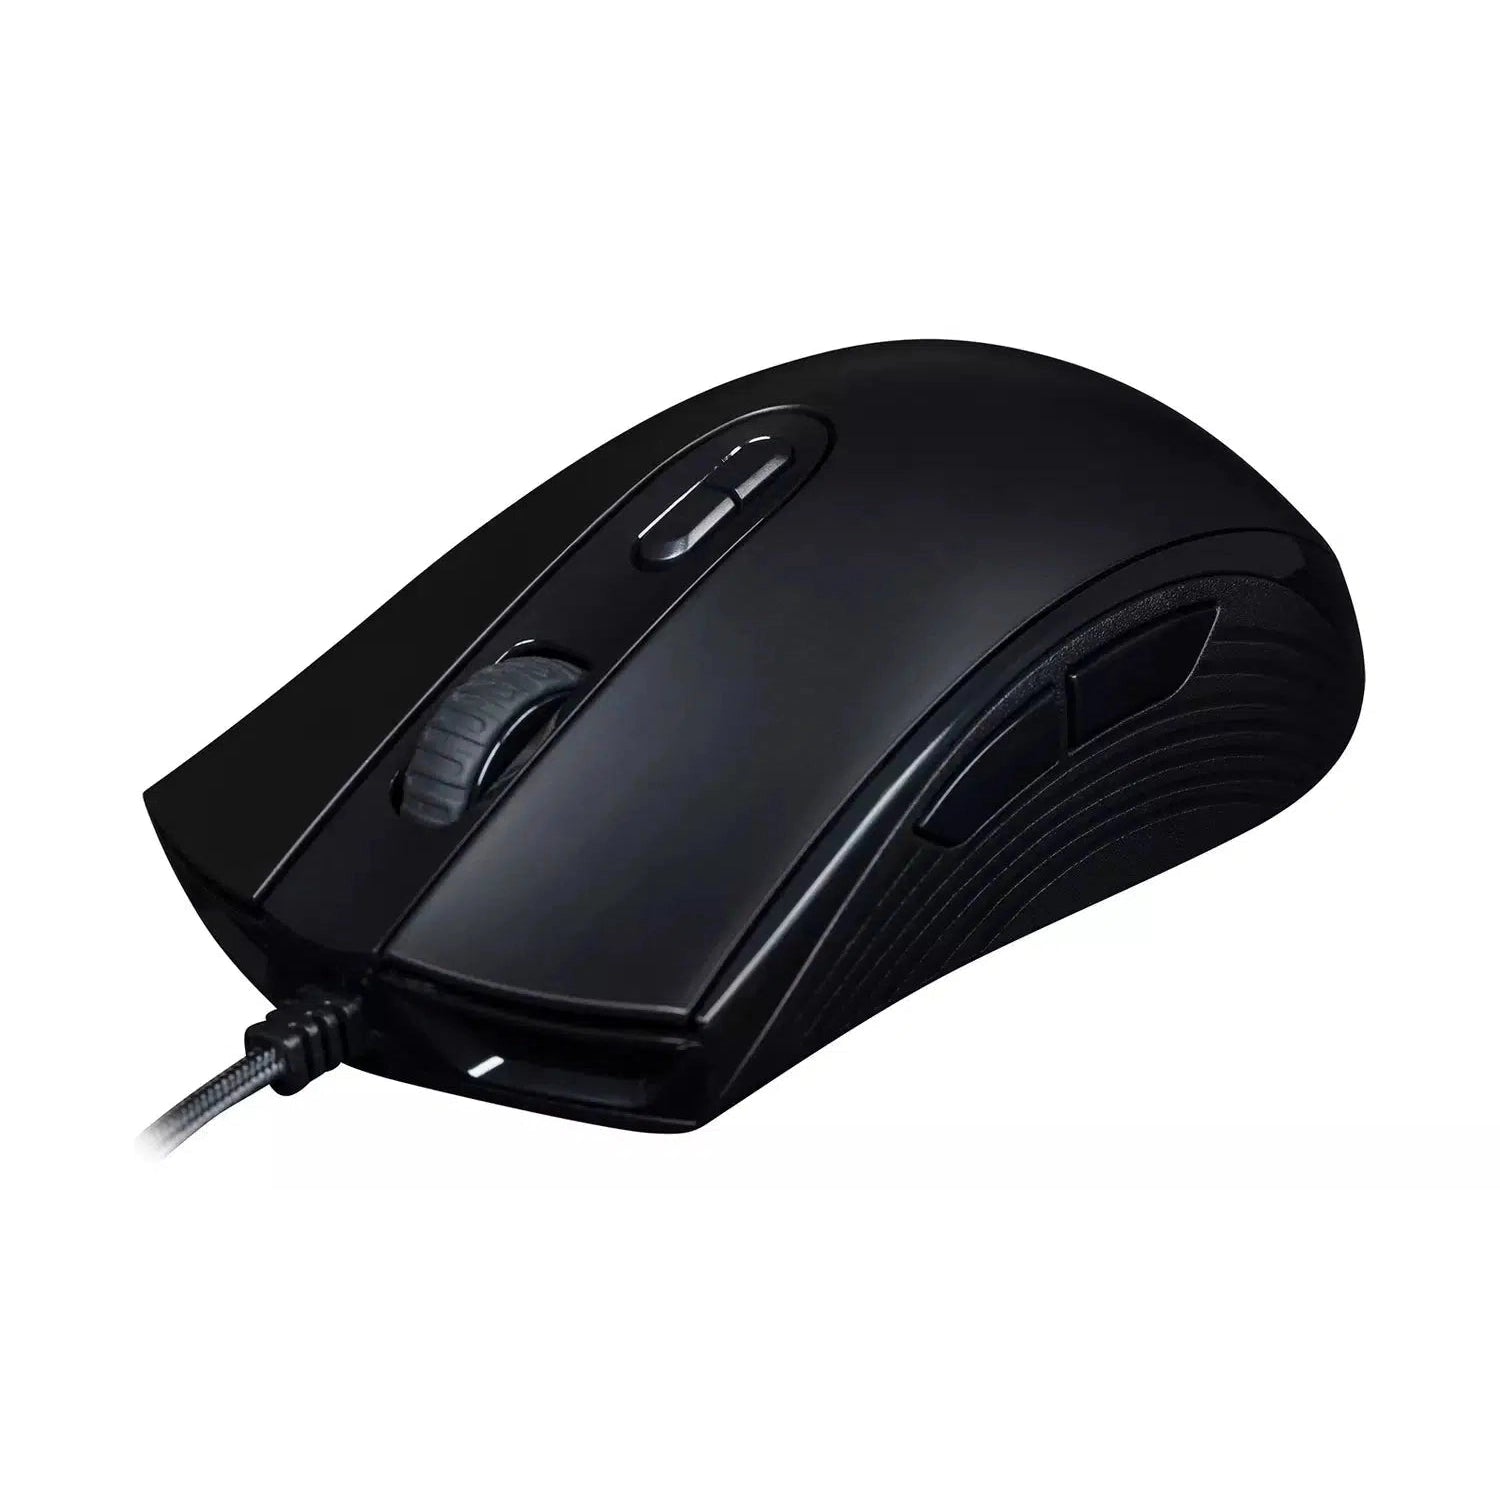 HyperX Pulsefire HX-MC004B Core Wired RGB Gaming Mouse, Black - Refurbished Excellent